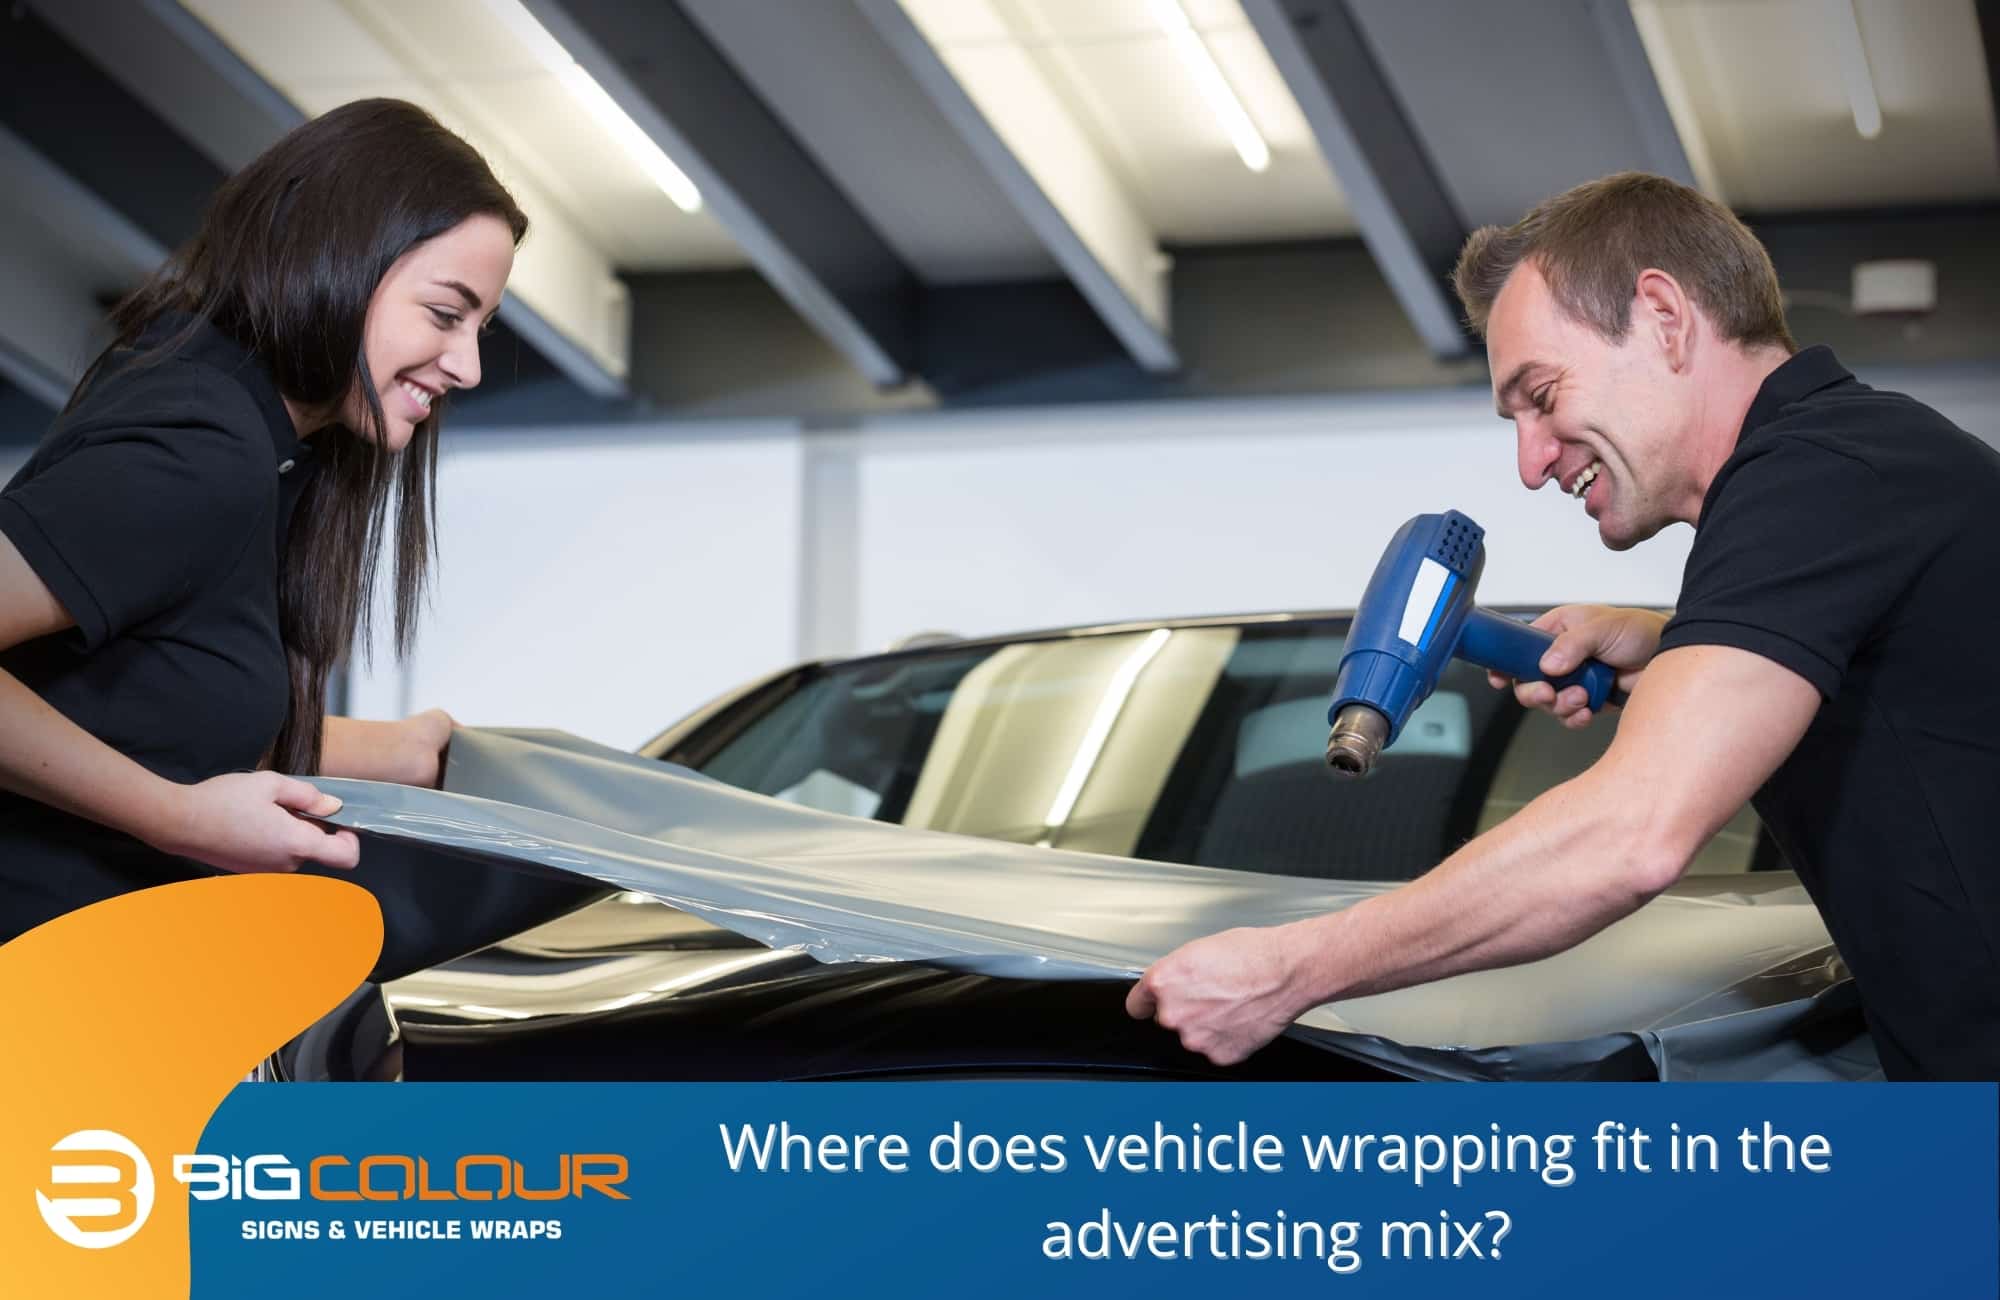 Where does vehicle wrapping fit in the advertising mix